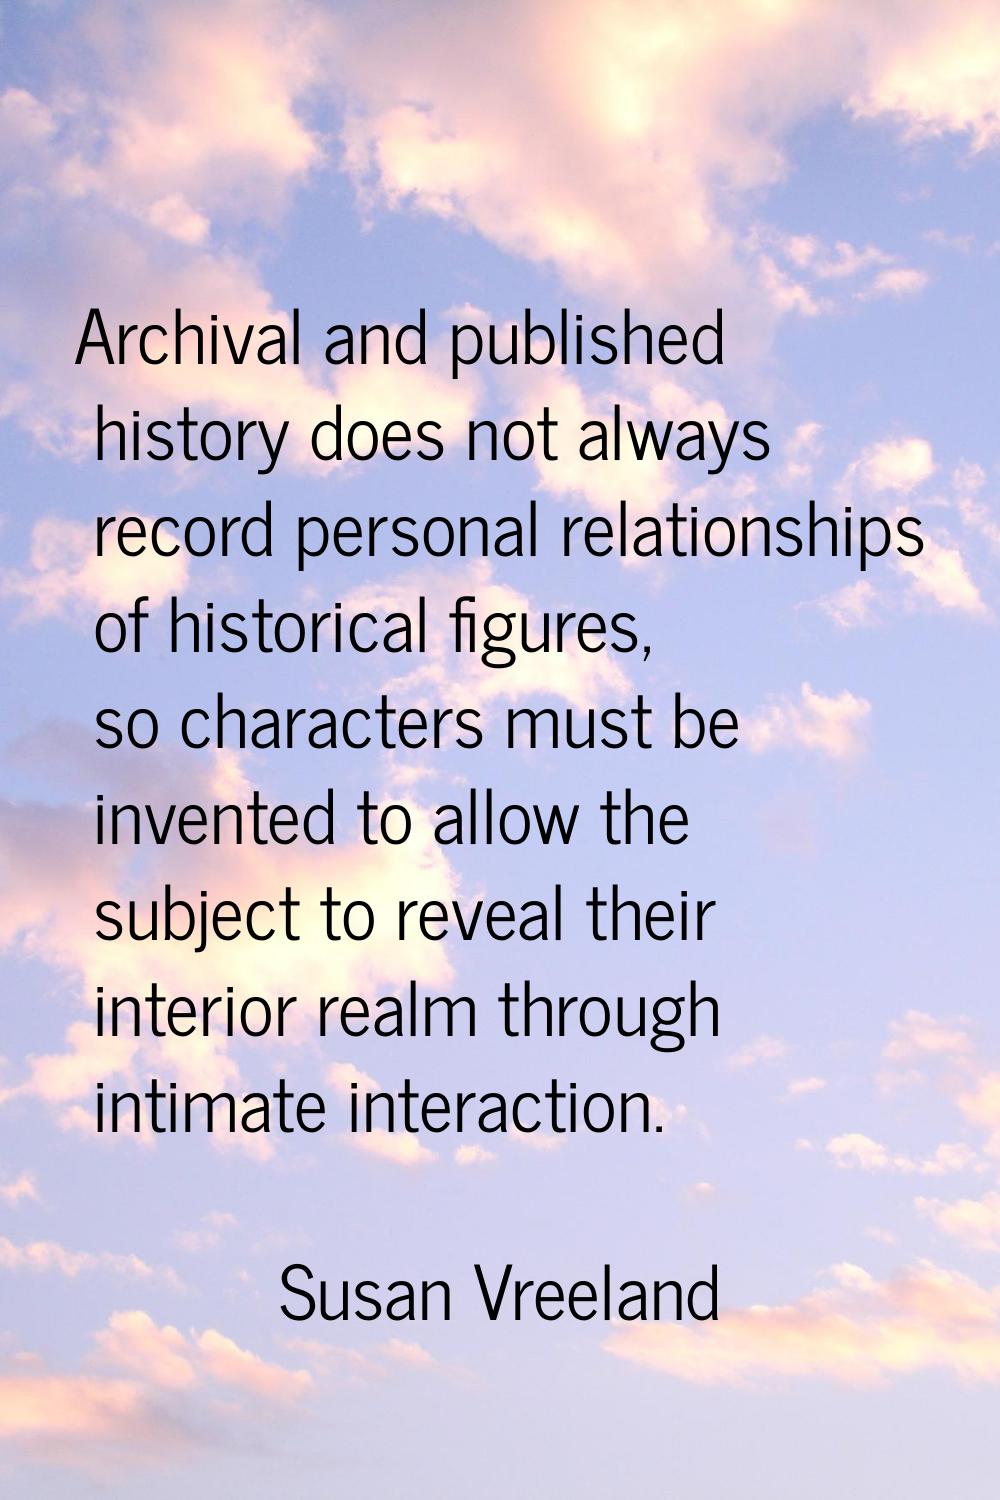 Archival and published history does not always record personal relationships of historical figures,